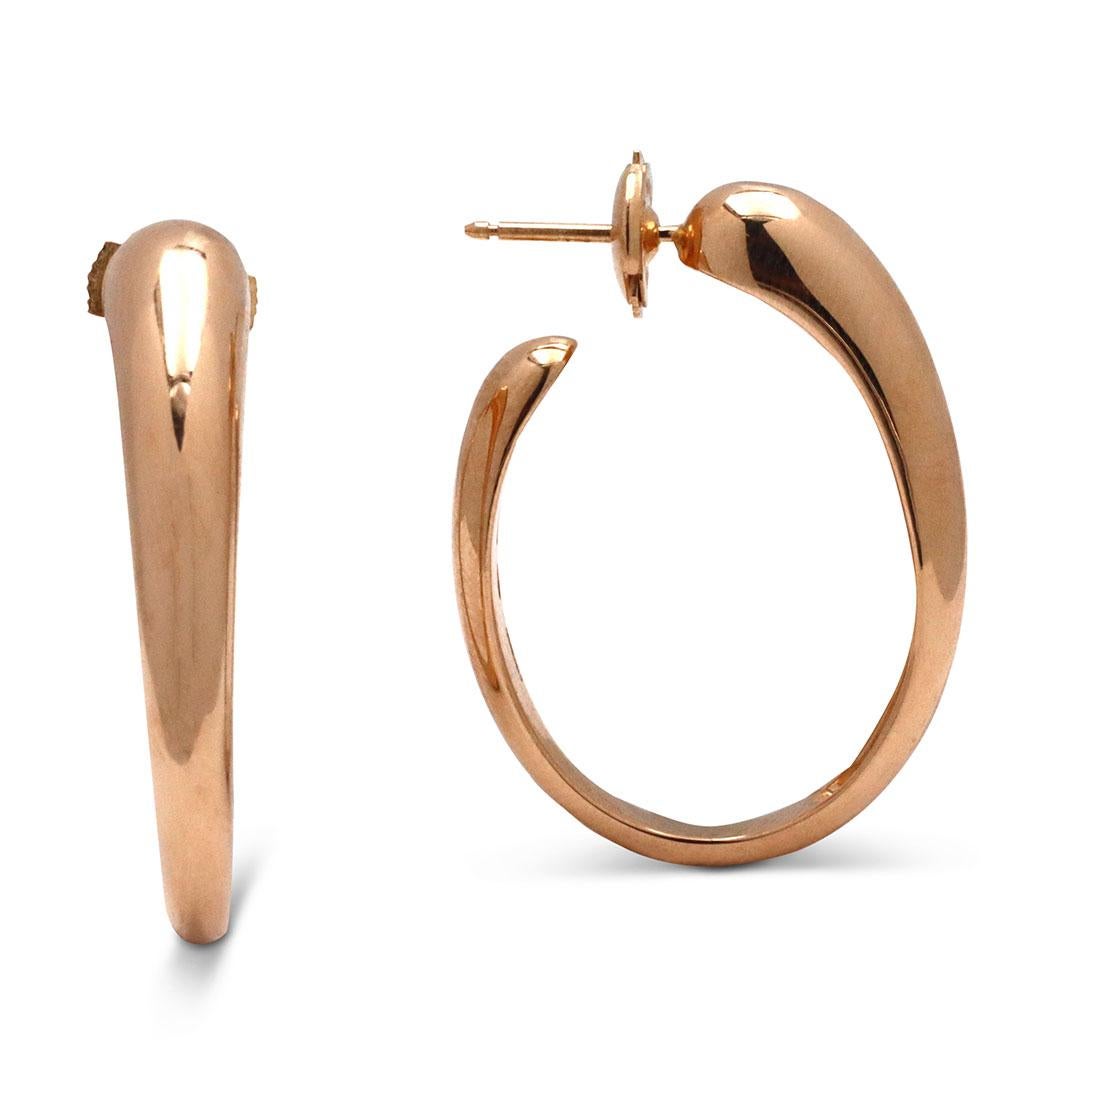 Authentic Pomellato 'Tango' earrings crafted in high polished 18 karat rose gold. The elegant curve of these earrings is inspired by the passionate, walking embrace of the Tango. The earrings measure 33.8 mm in length and 25.7mm at the widest point.